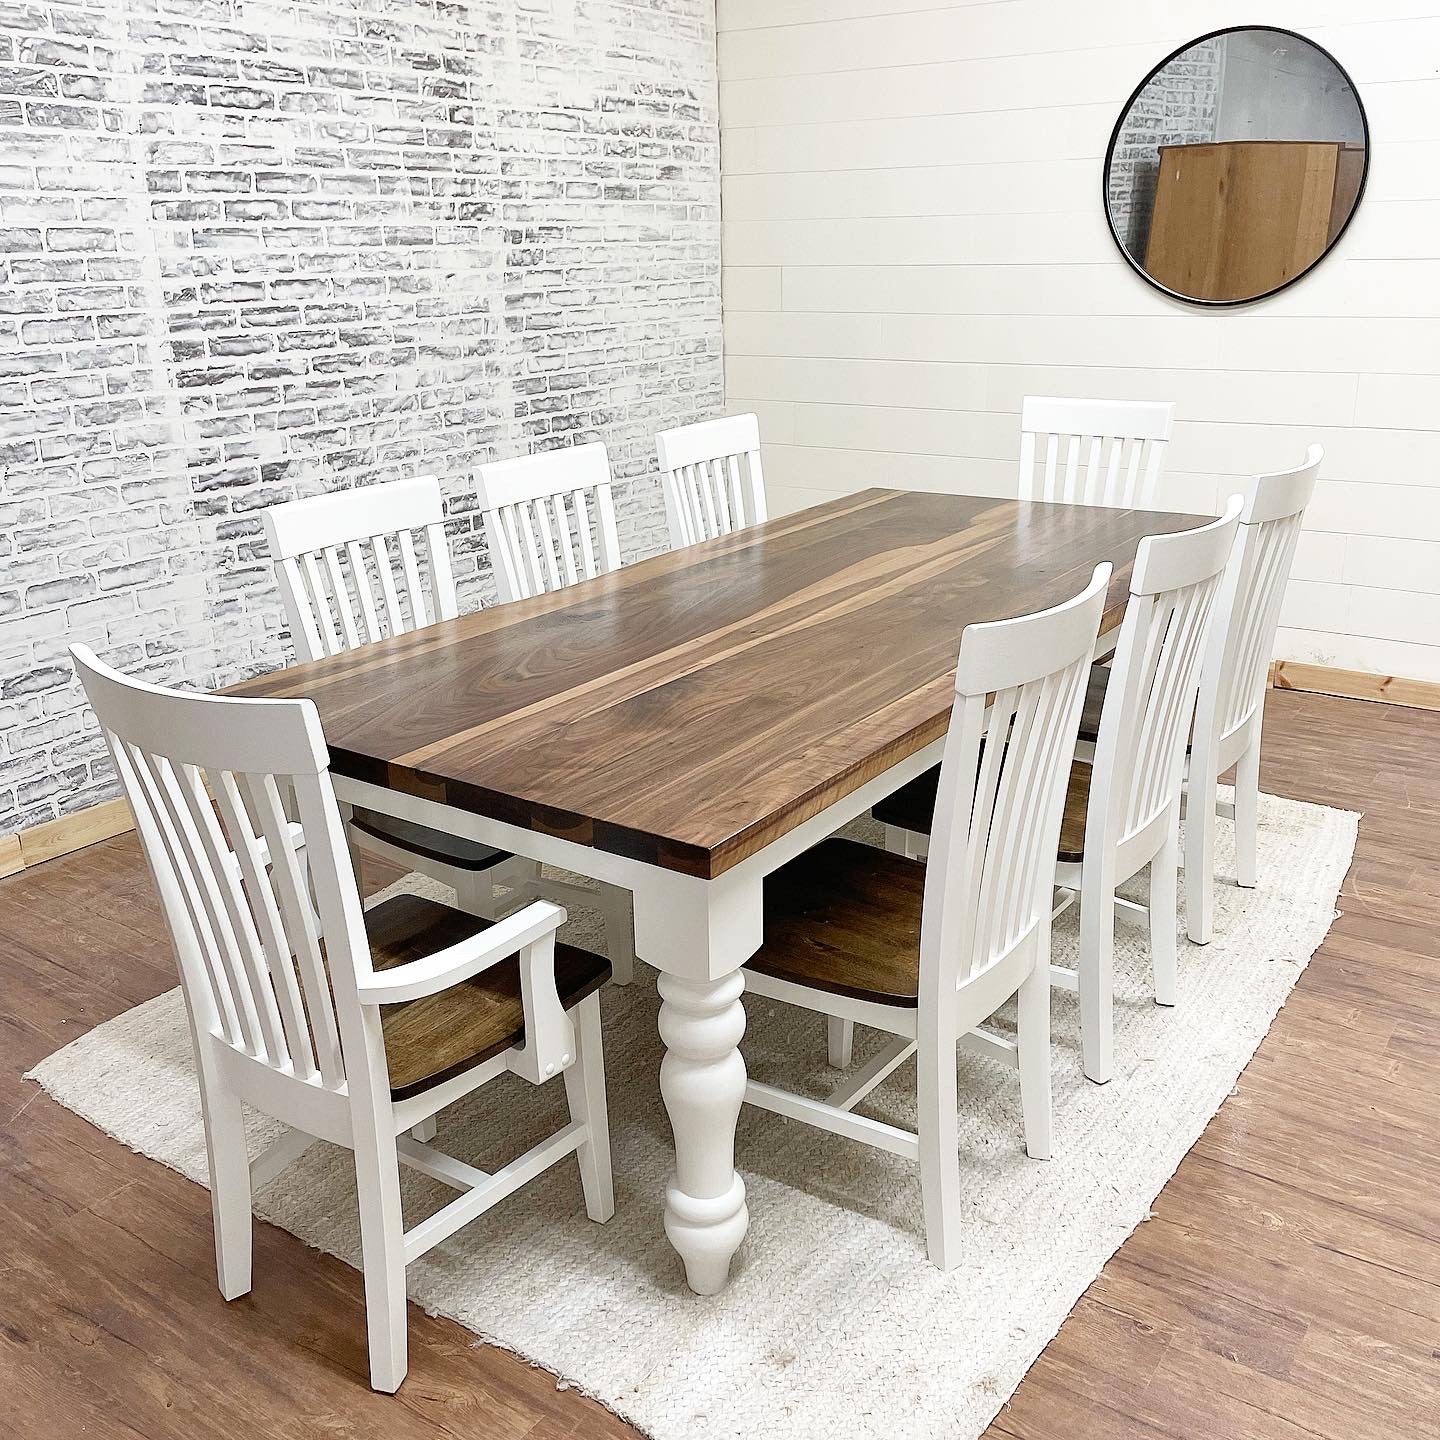 Pictured with an 8' L x 42" W Walnut top with a Natural finish and White painted base. Pictured with 6 Mission Chairs and 2 Captain Mission Chairs with seats stained to match the walnut top.